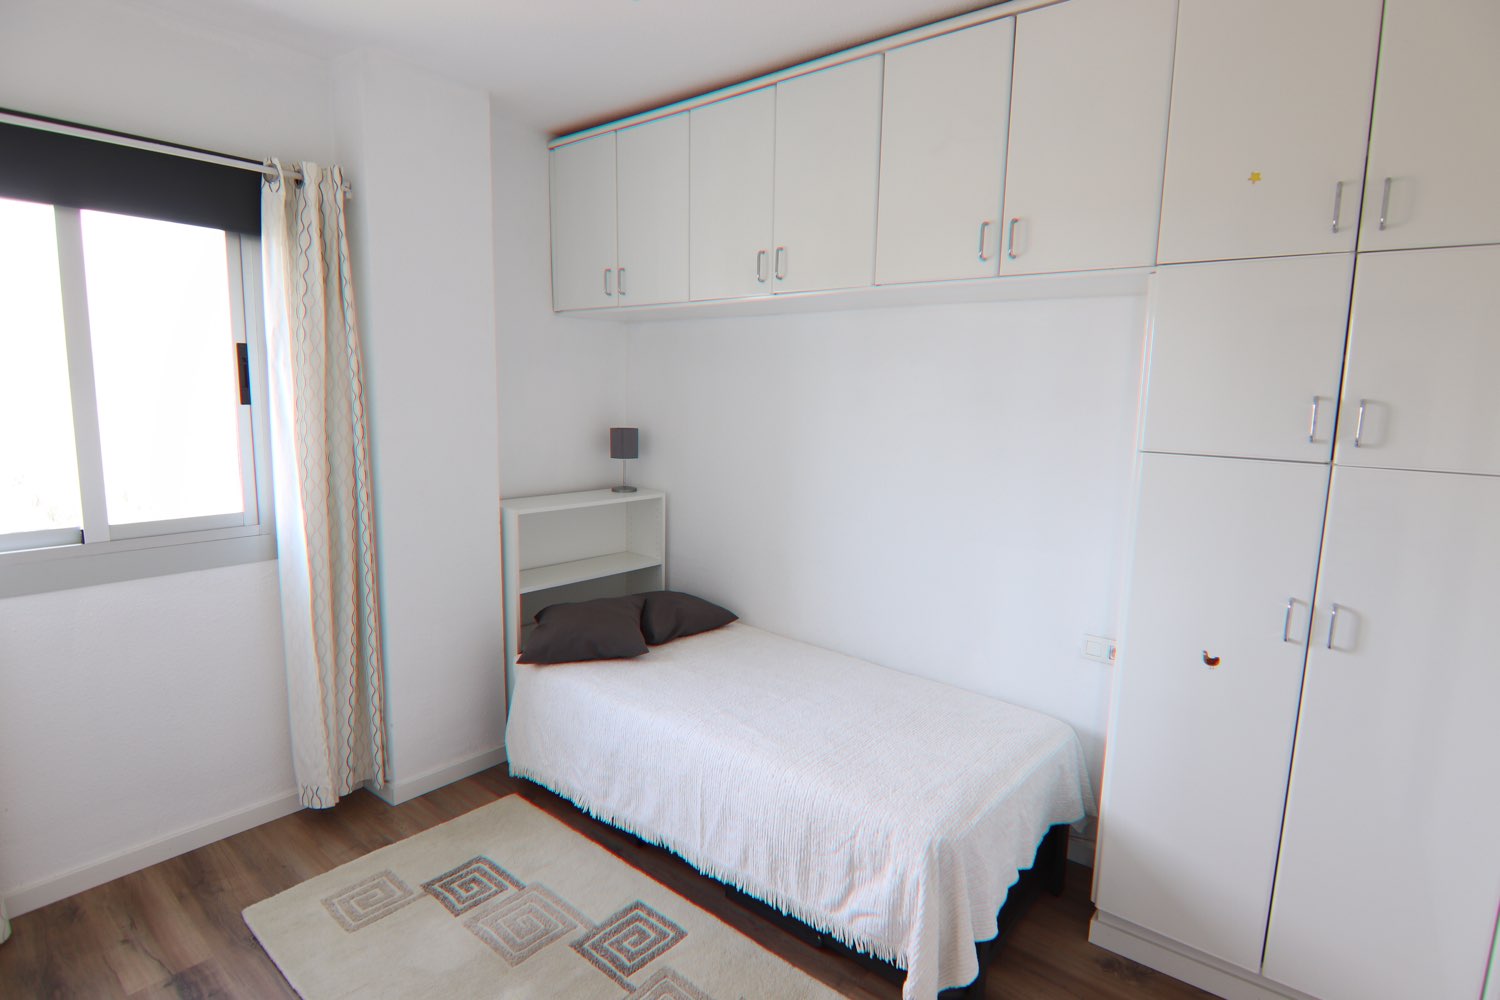 Renovated and furnished apartment